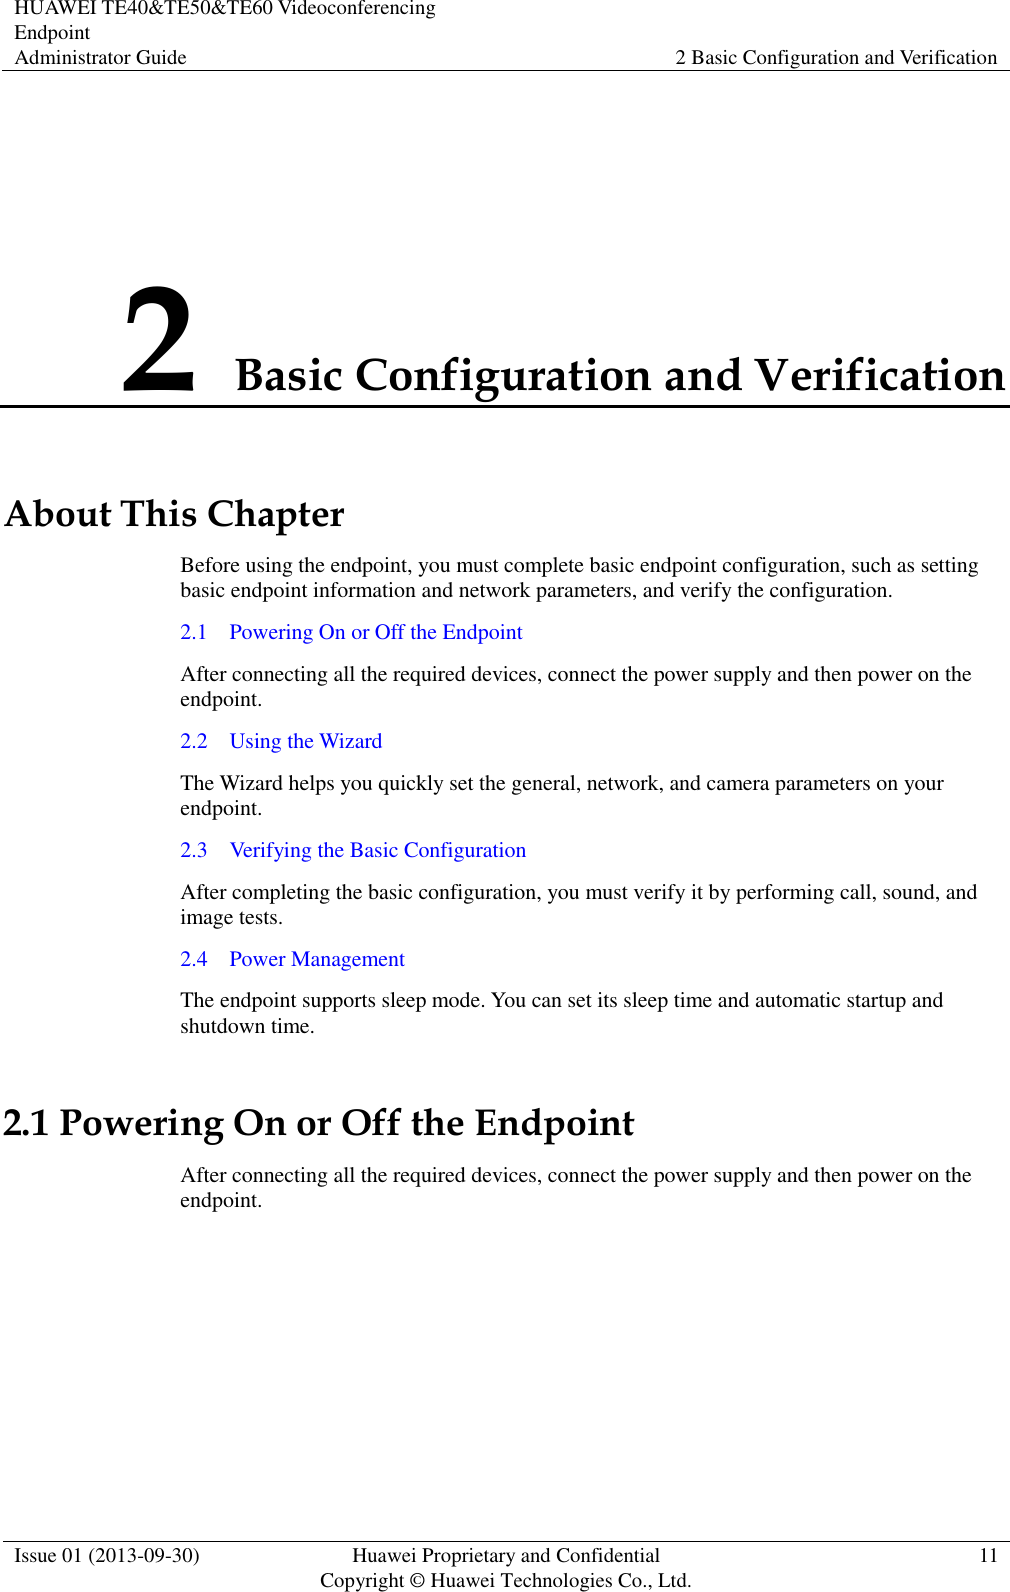 HUAWEI TE40&amp;TE50&amp;TE60 Videoconferencing Endpoint Administrator Guide 2 Basic Configuration and Verification  Issue 01 (2013-09-30) Huawei Proprietary and Confidential                                     Copyright © Huawei Technologies Co., Ltd. 11  2 Basic Configuration and Verification About This Chapter Before using the endpoint, you must complete basic endpoint configuration, such as setting basic endpoint information and network parameters, and verify the configuration. 2.1    Powering On or Off the Endpoint After connecting all the required devices, connect the power supply and then power on the endpoint. 2.2    Using the Wizard The Wizard helps you quickly set the general, network, and camera parameters on your endpoint. 2.3    Verifying the Basic Configuration After completing the basic configuration, you must verify it by performing call, sound, and image tests. 2.4    Power Management The endpoint supports sleep mode. You can set its sleep time and automatic startup and shutdown time. 2.1 Powering On or Off the Endpoint After connecting all the required devices, connect the power supply and then power on the endpoint.  